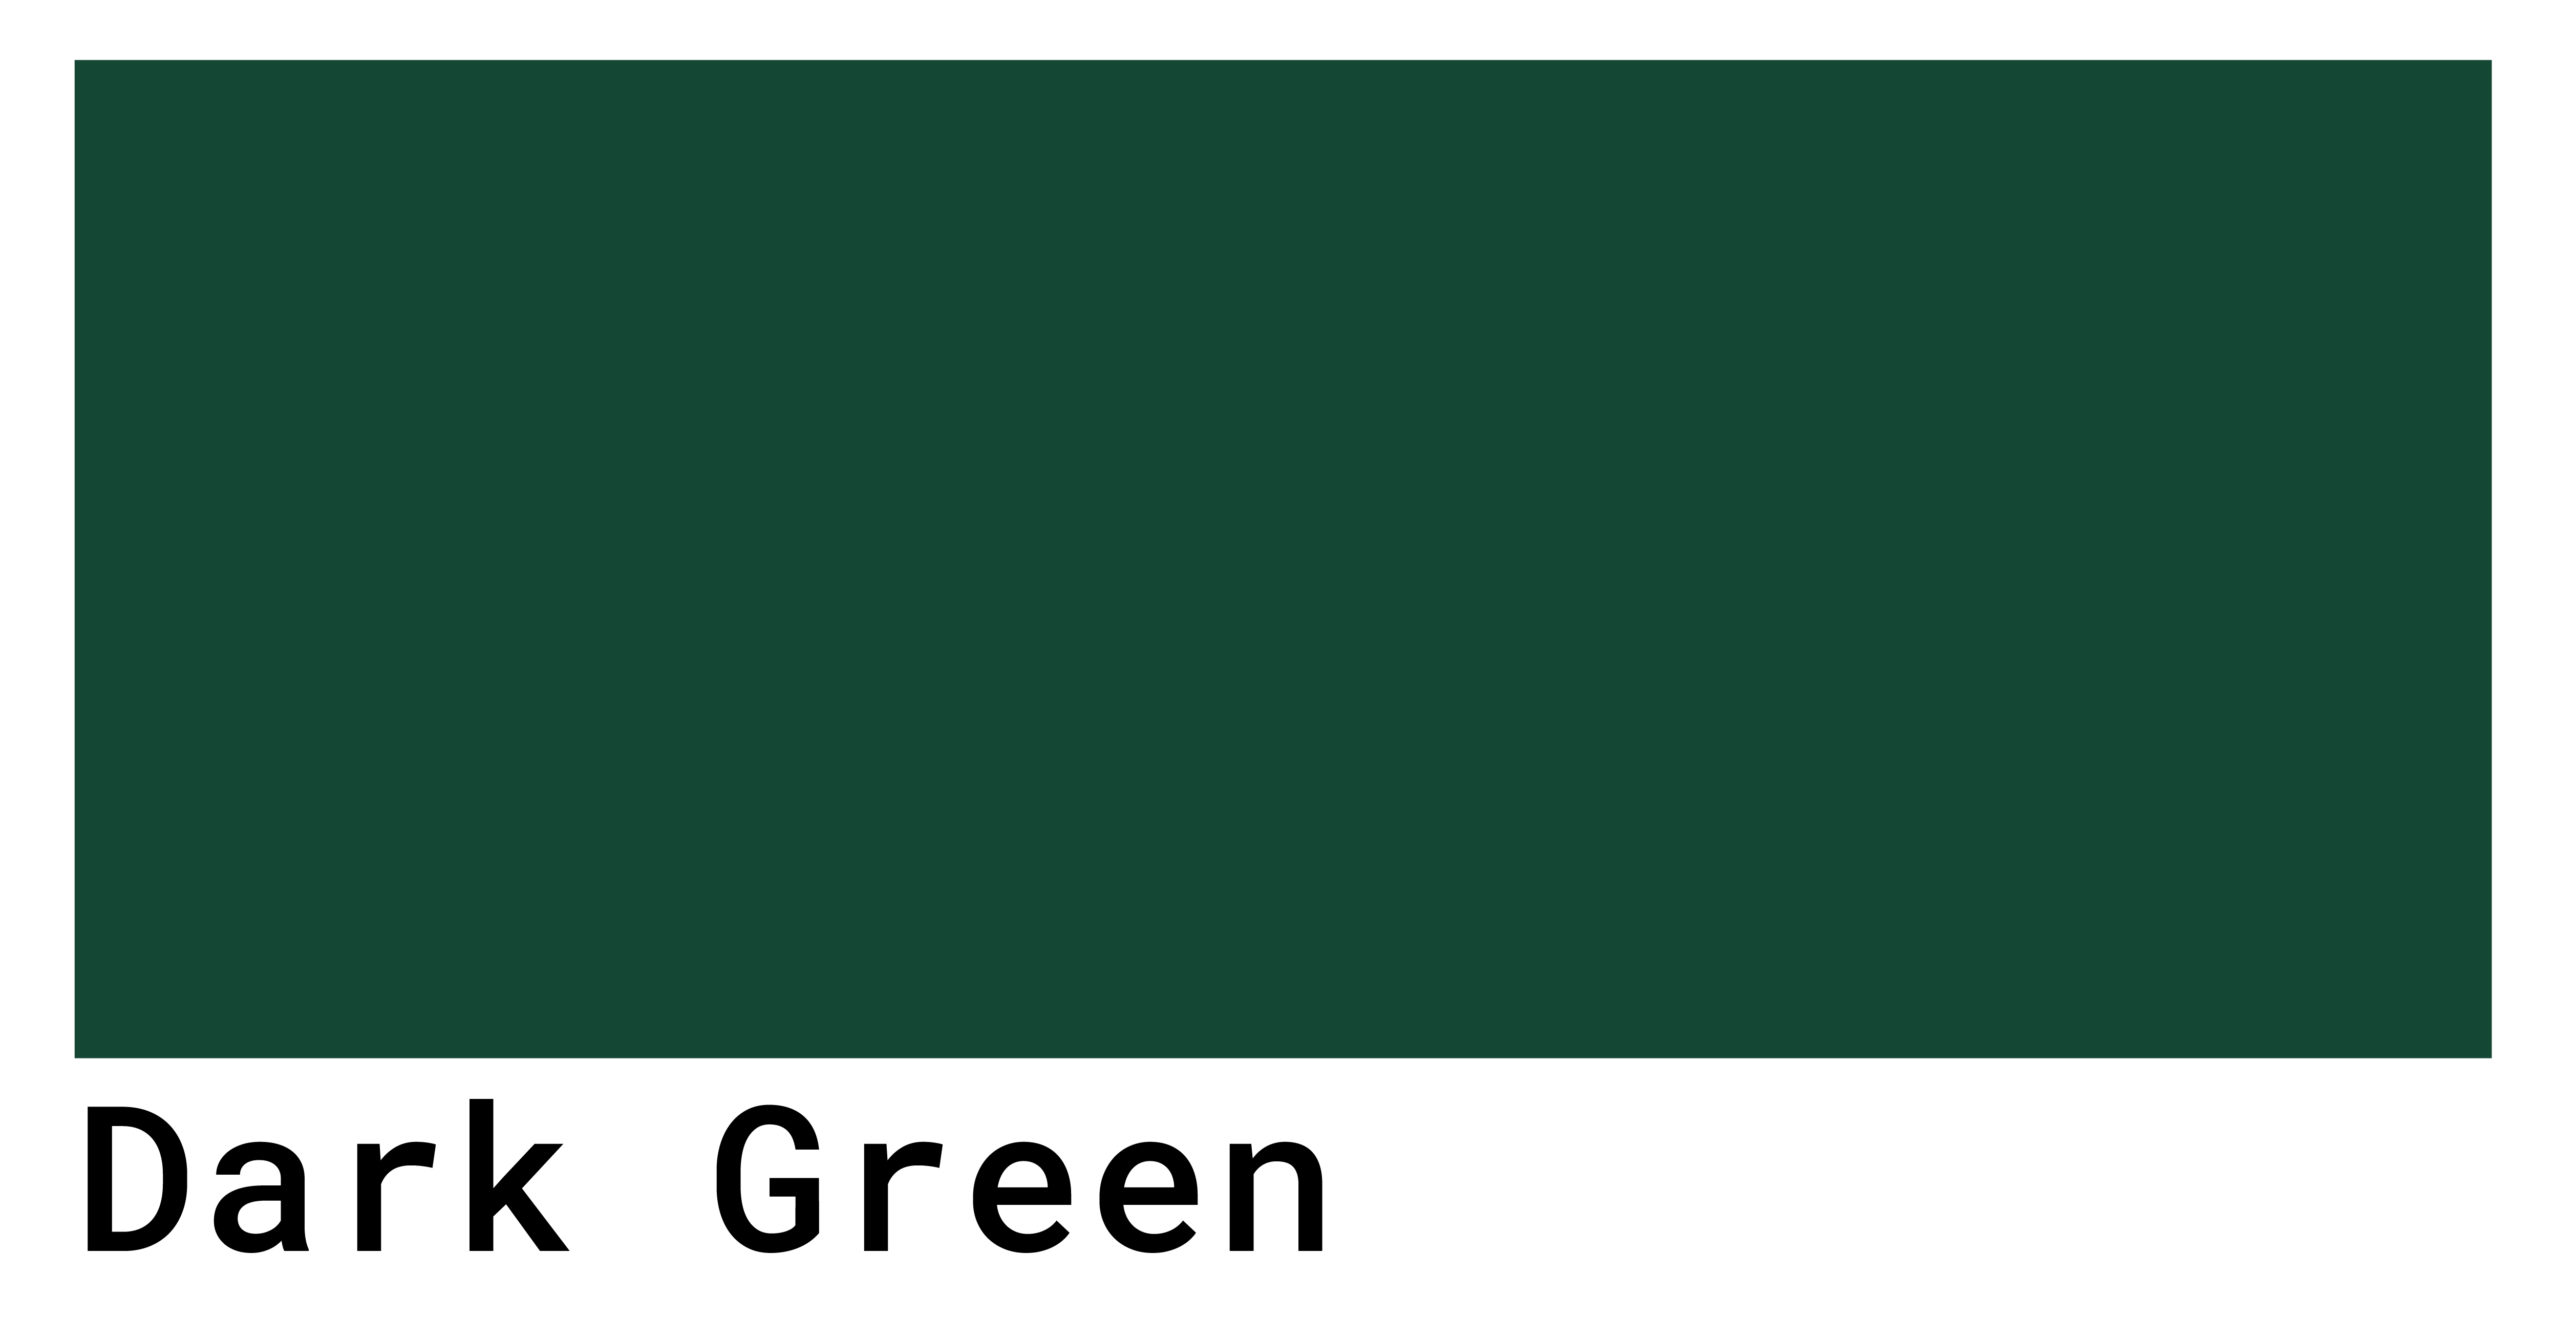 Dark Green Color Codes The Hex, RGB and CMYK Values That